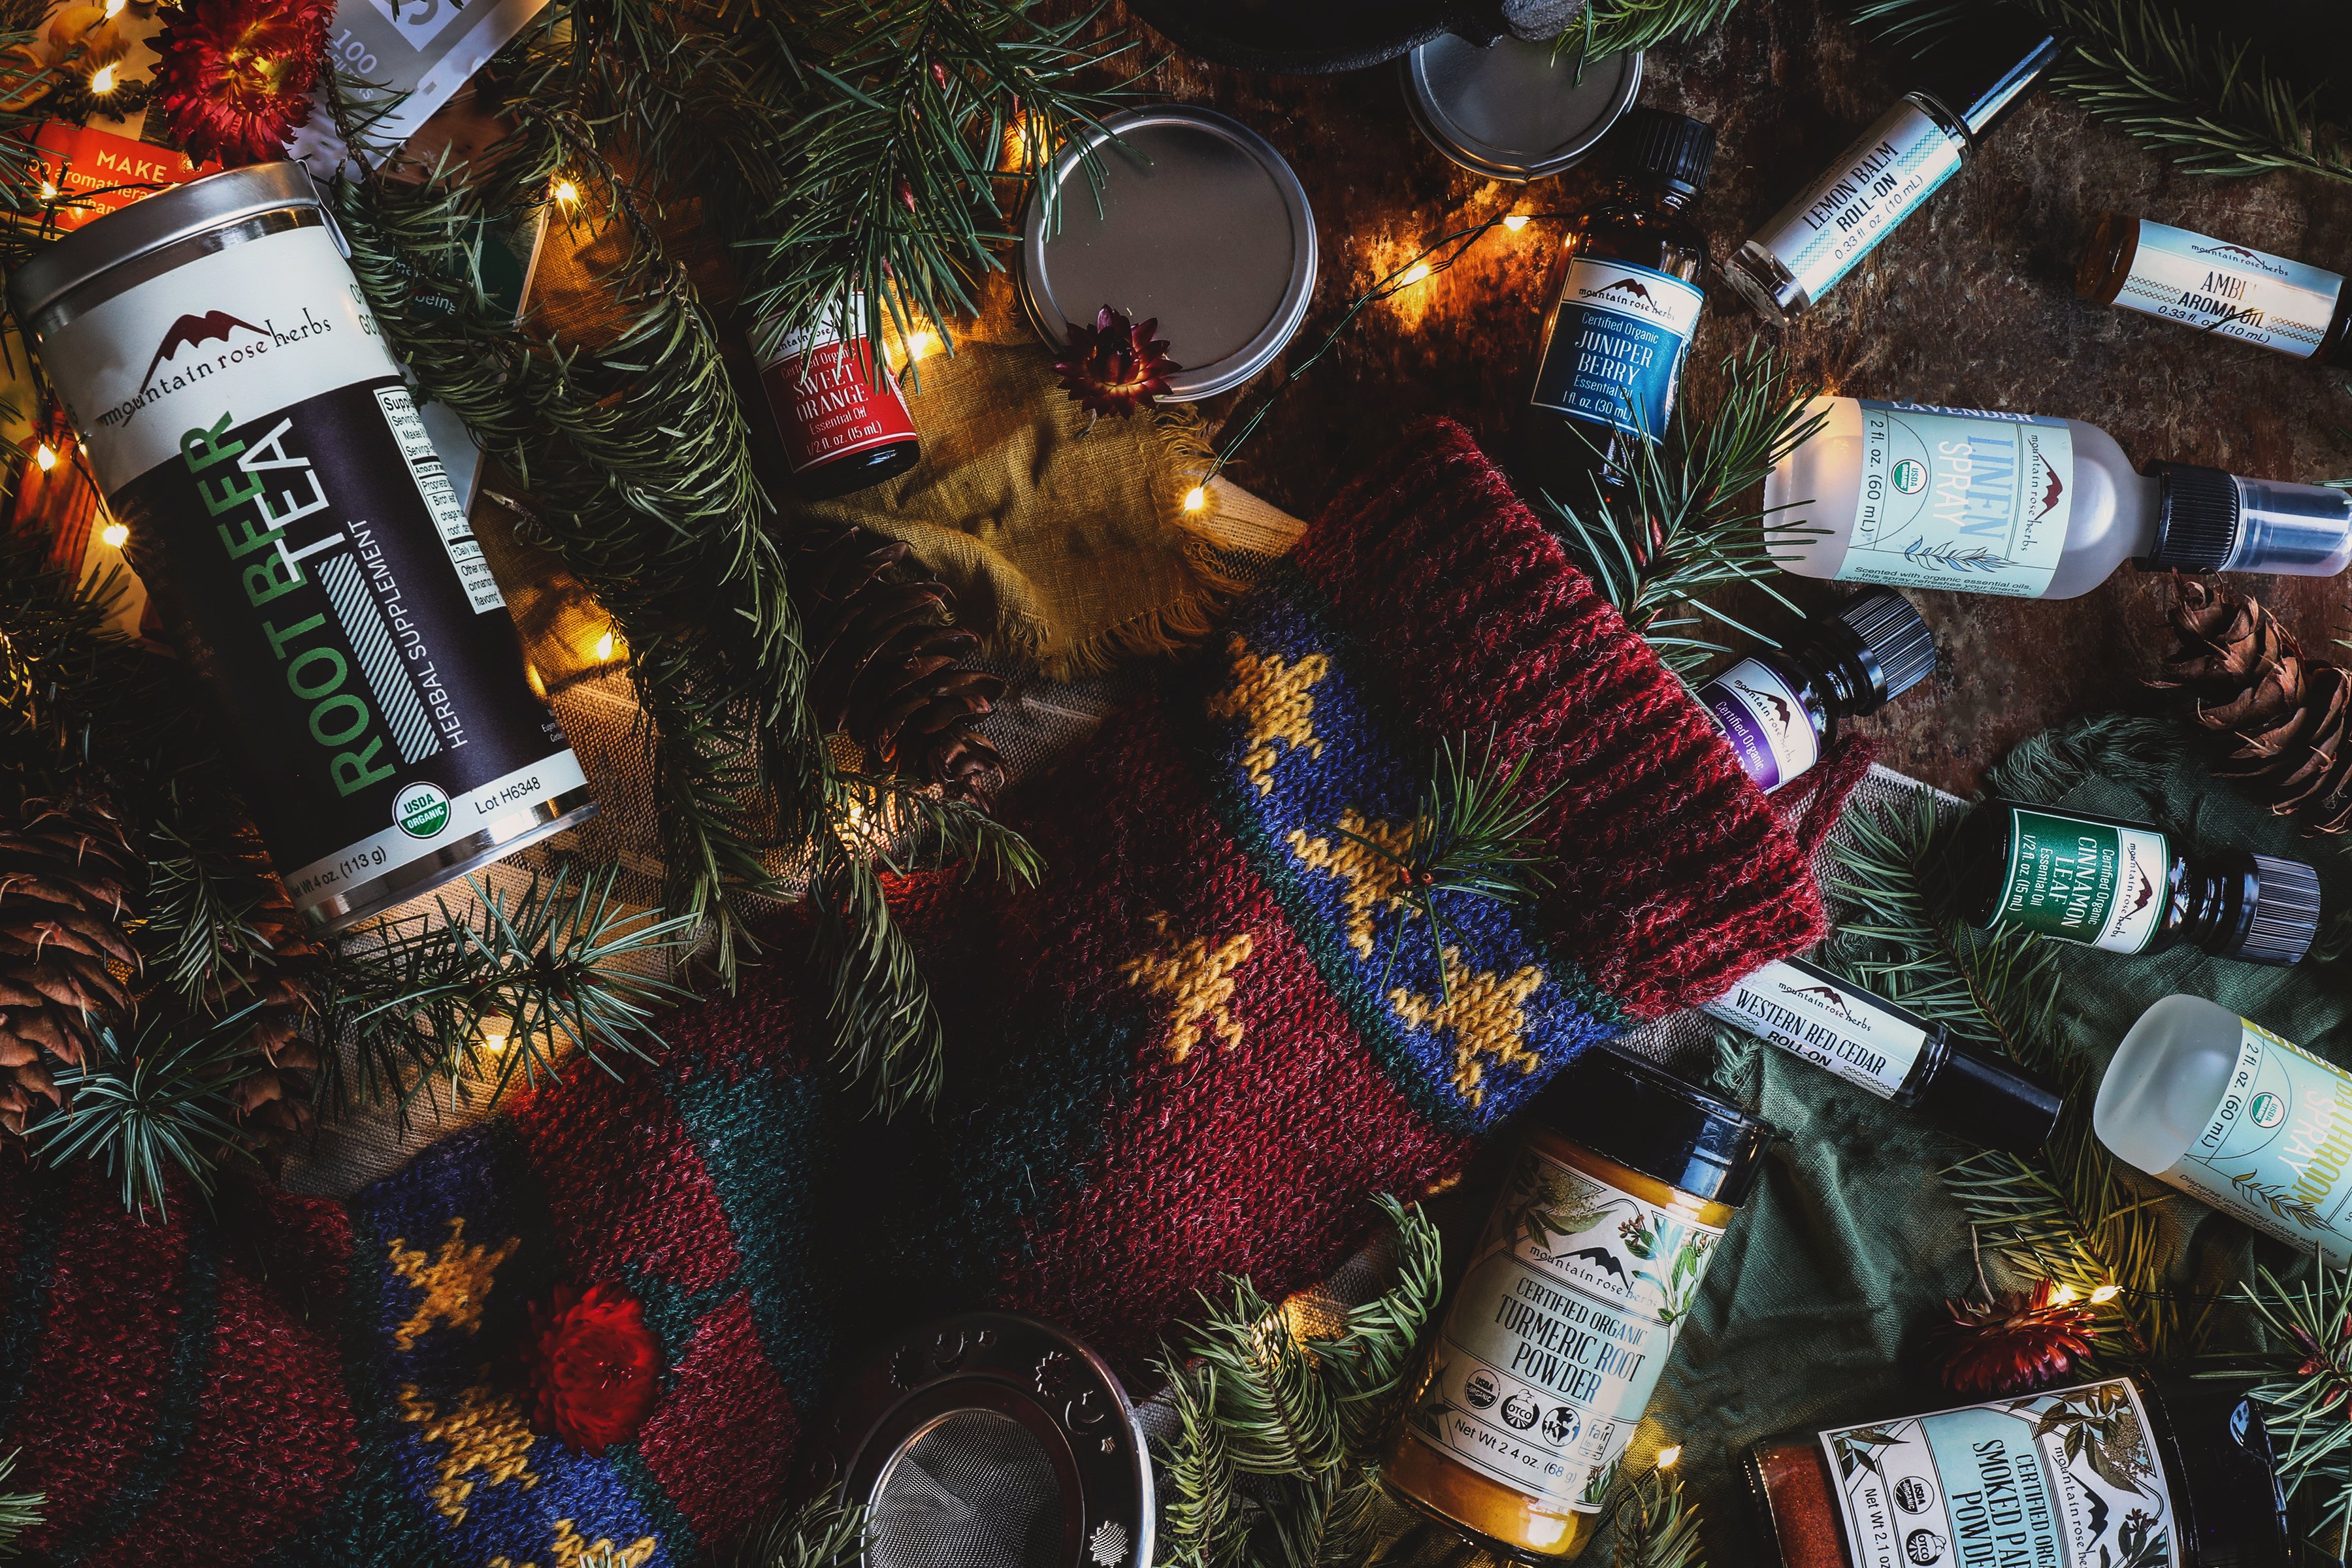 A festive display of herbal gifts under 20